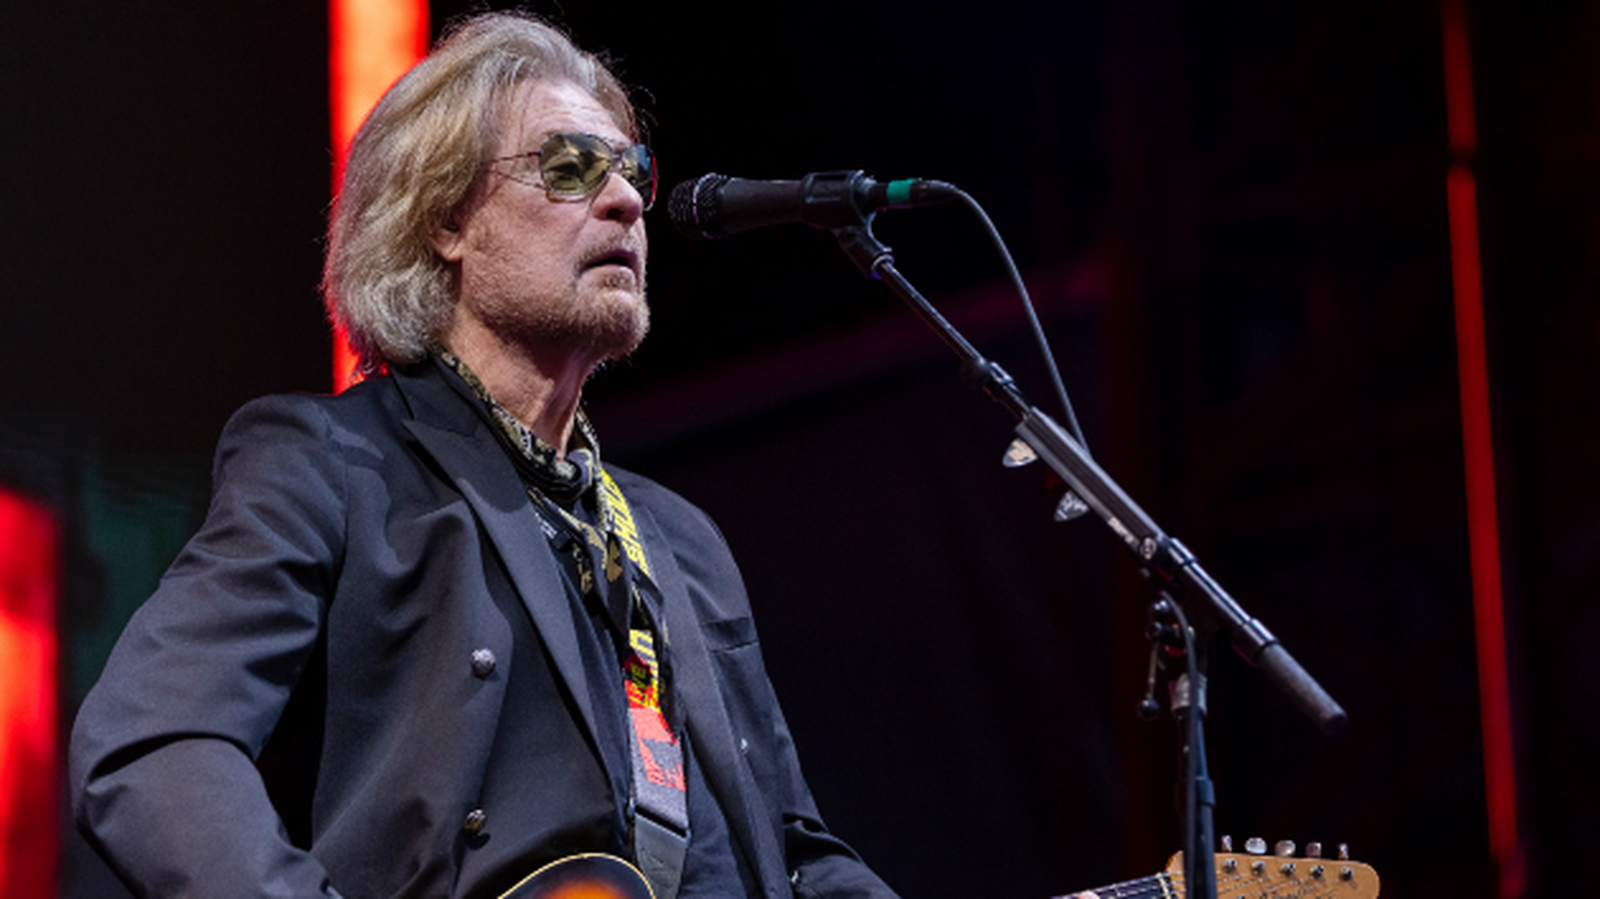 Daryl Hall to join Billy Joel at BST Hyde Park concert KONO 101.1